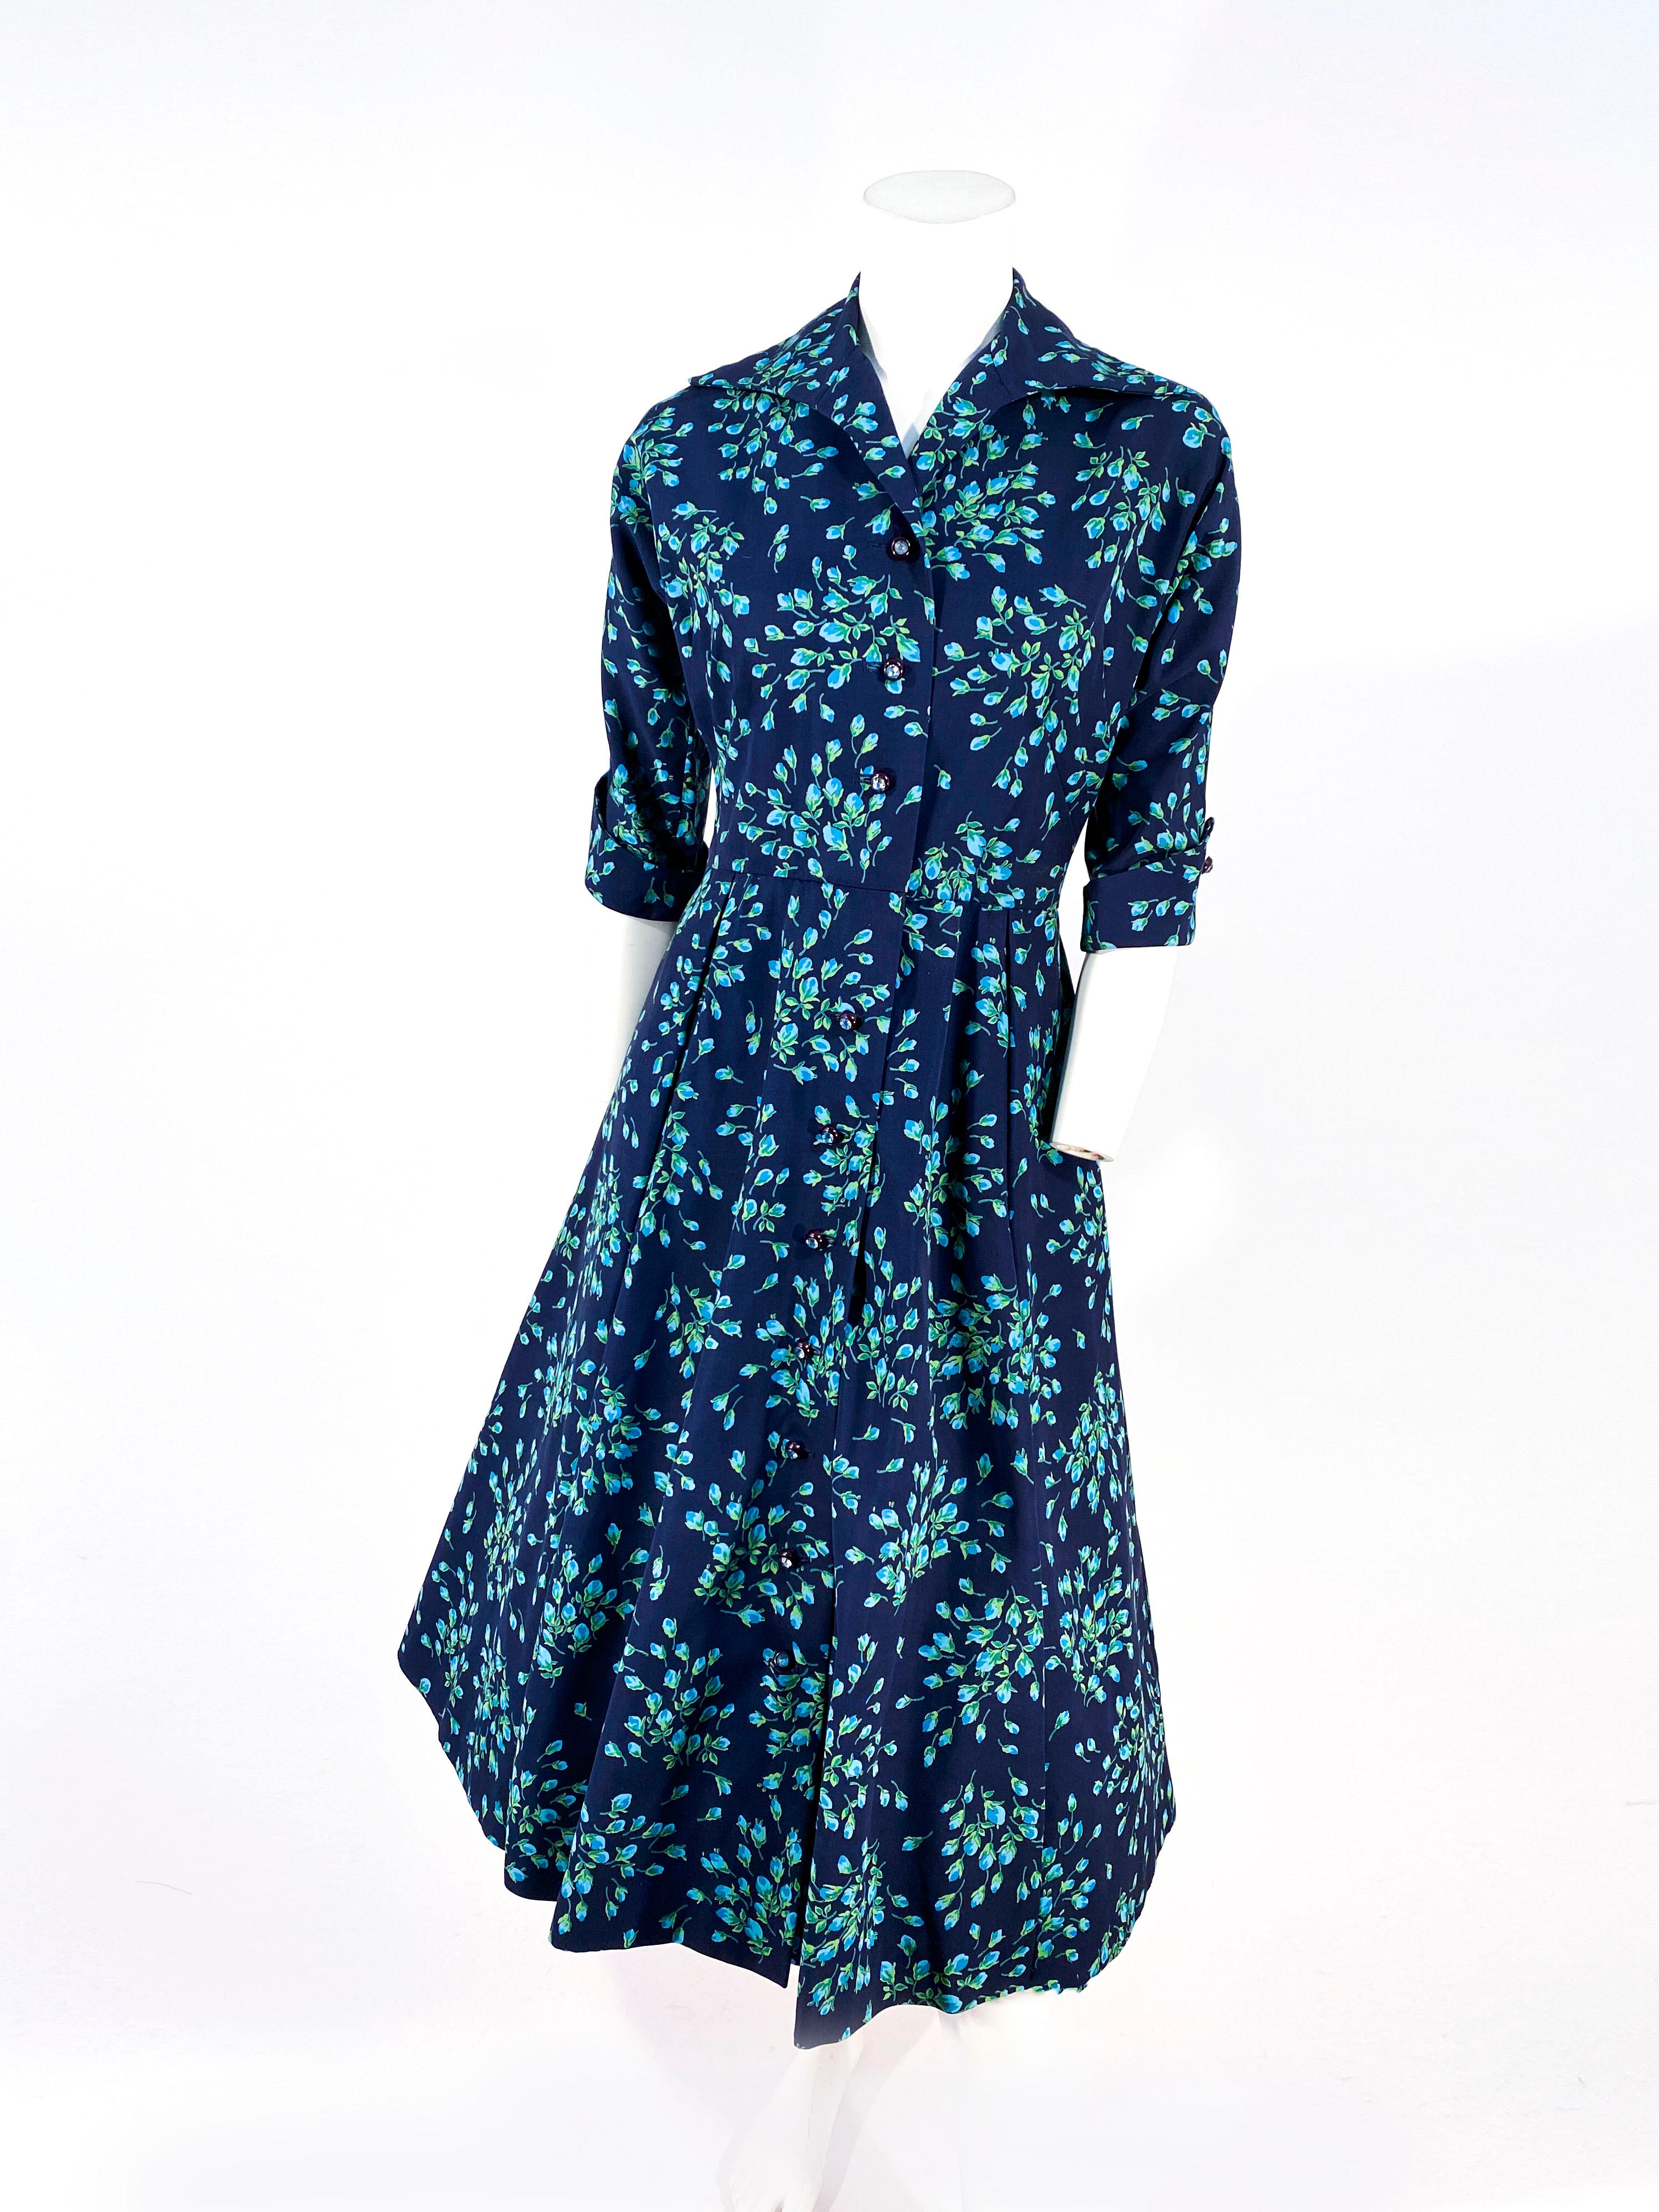 Women's 1950s Navy Blue Floral Printed Dress For Sale